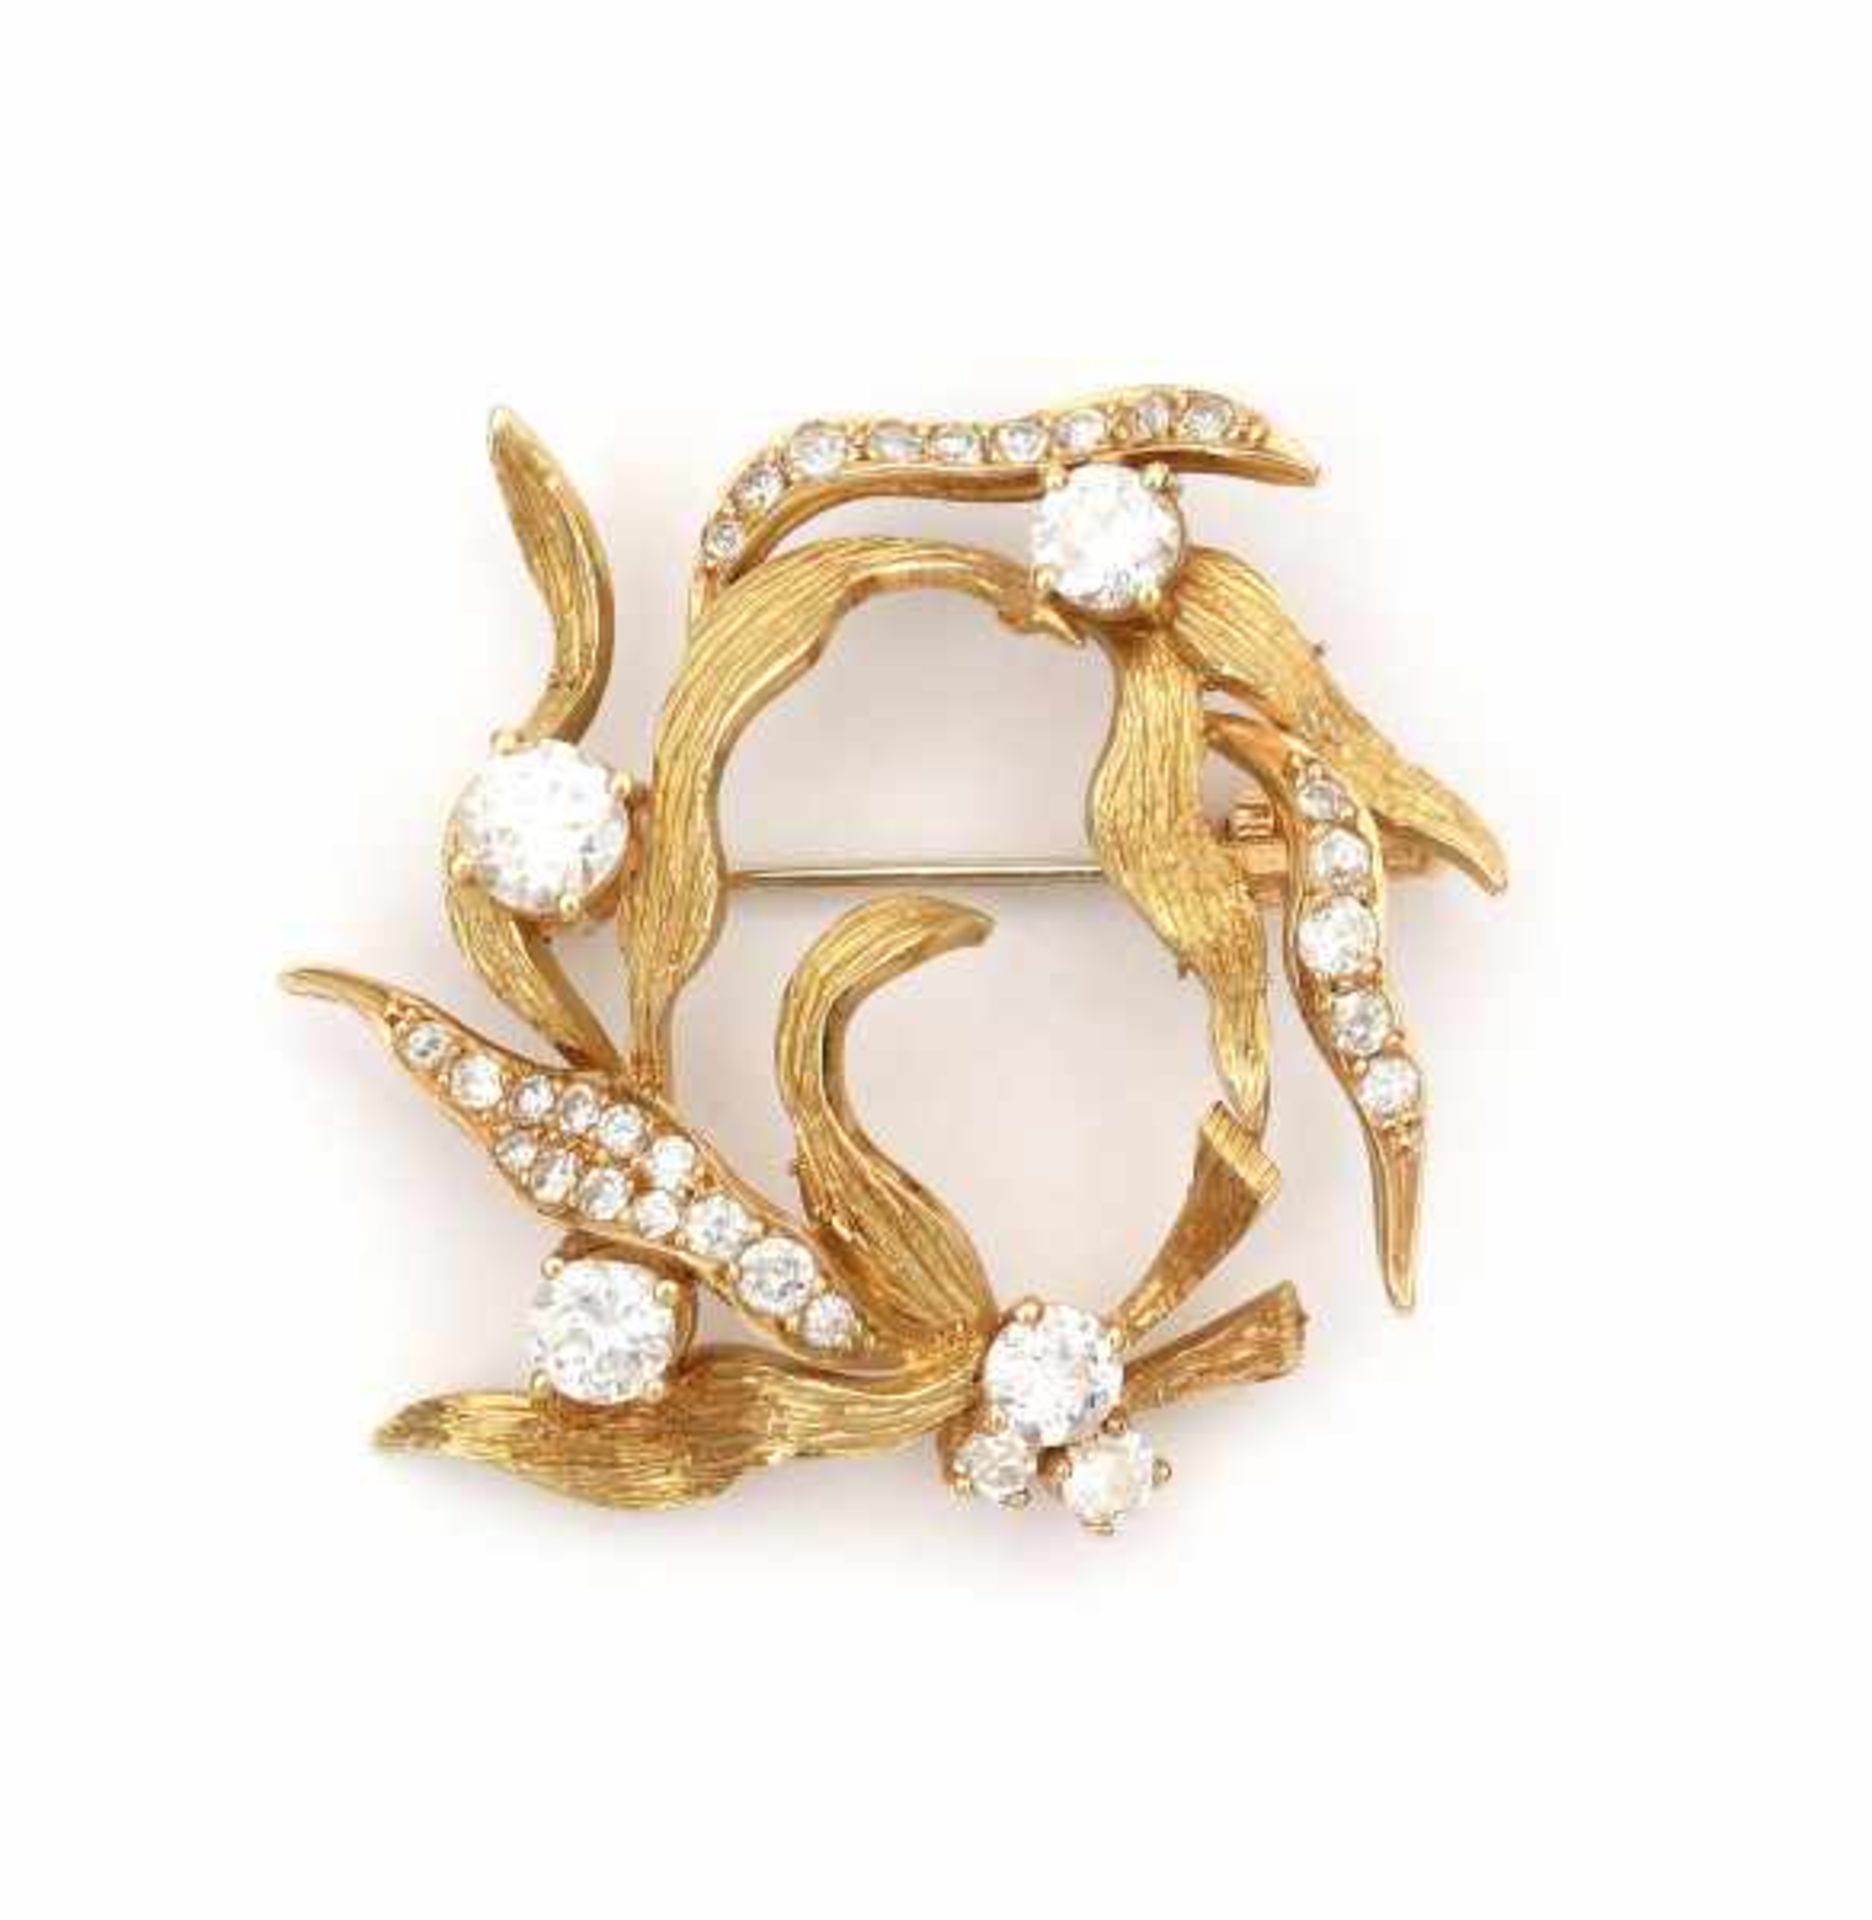 An 18 krt yellow gold circular brooch of floral or leaf design, from the 1970's. Set with